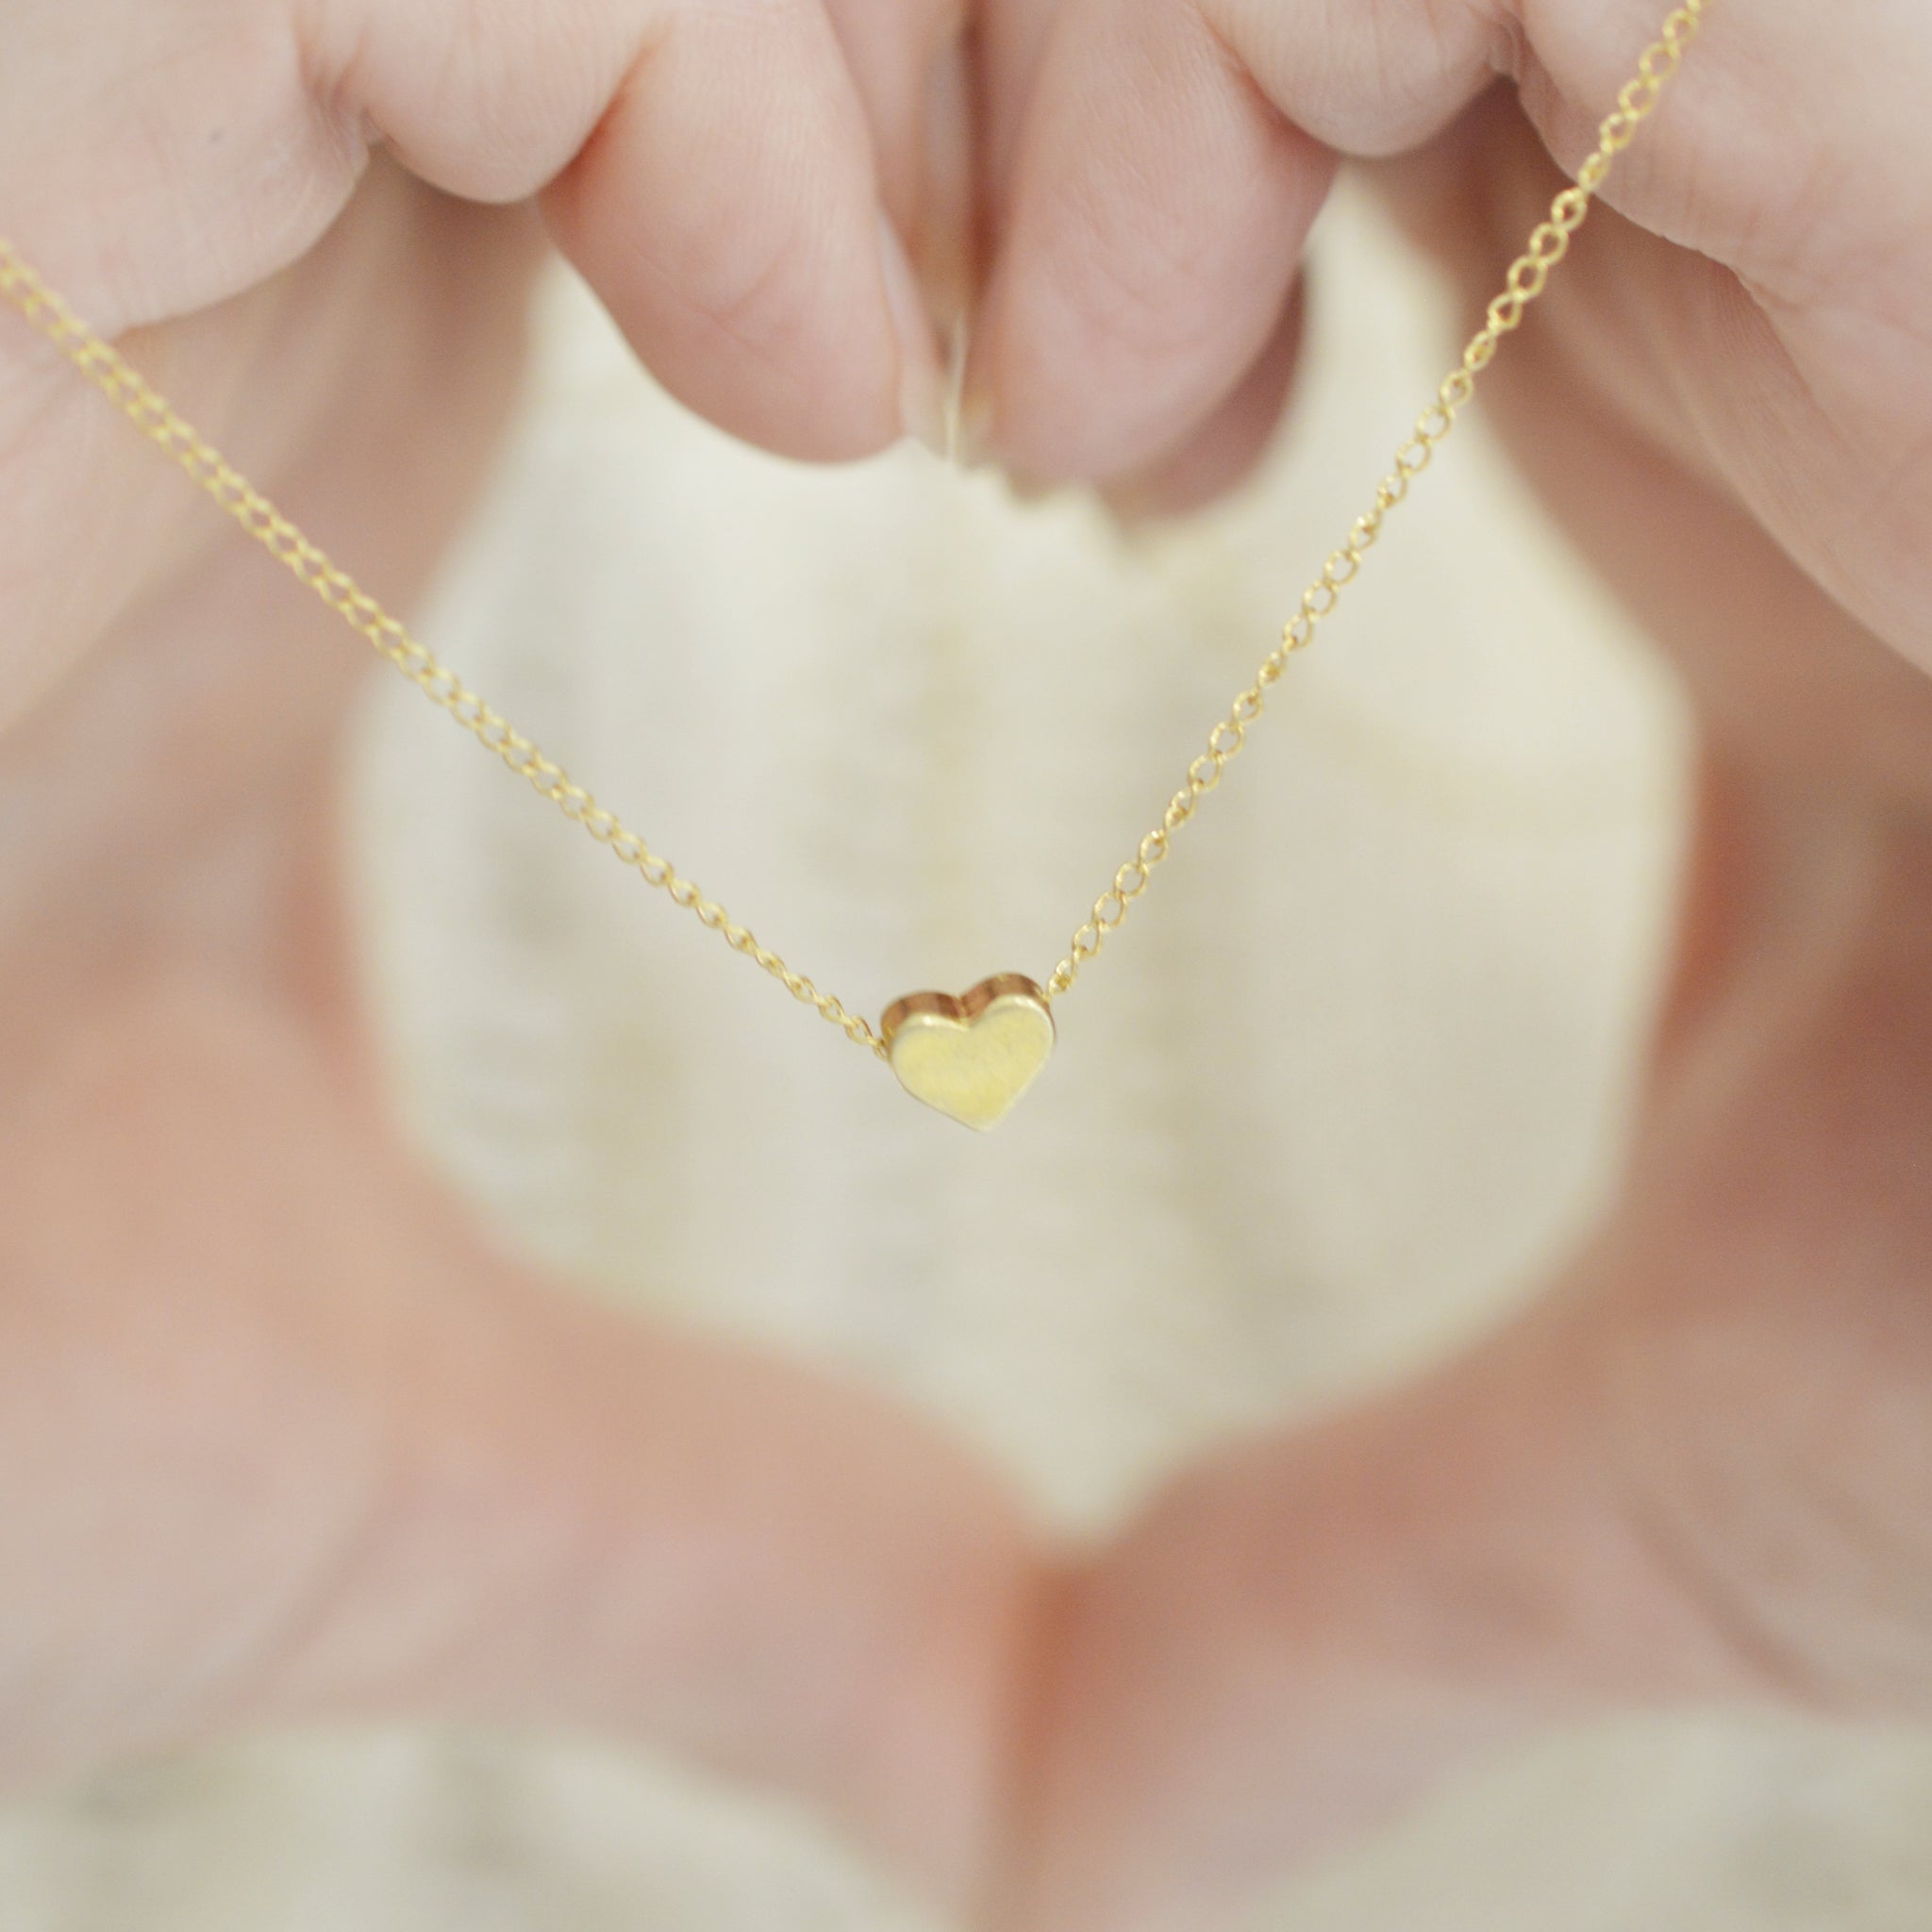 Tiny Heart Necklace - Pink Moon Jewelry 